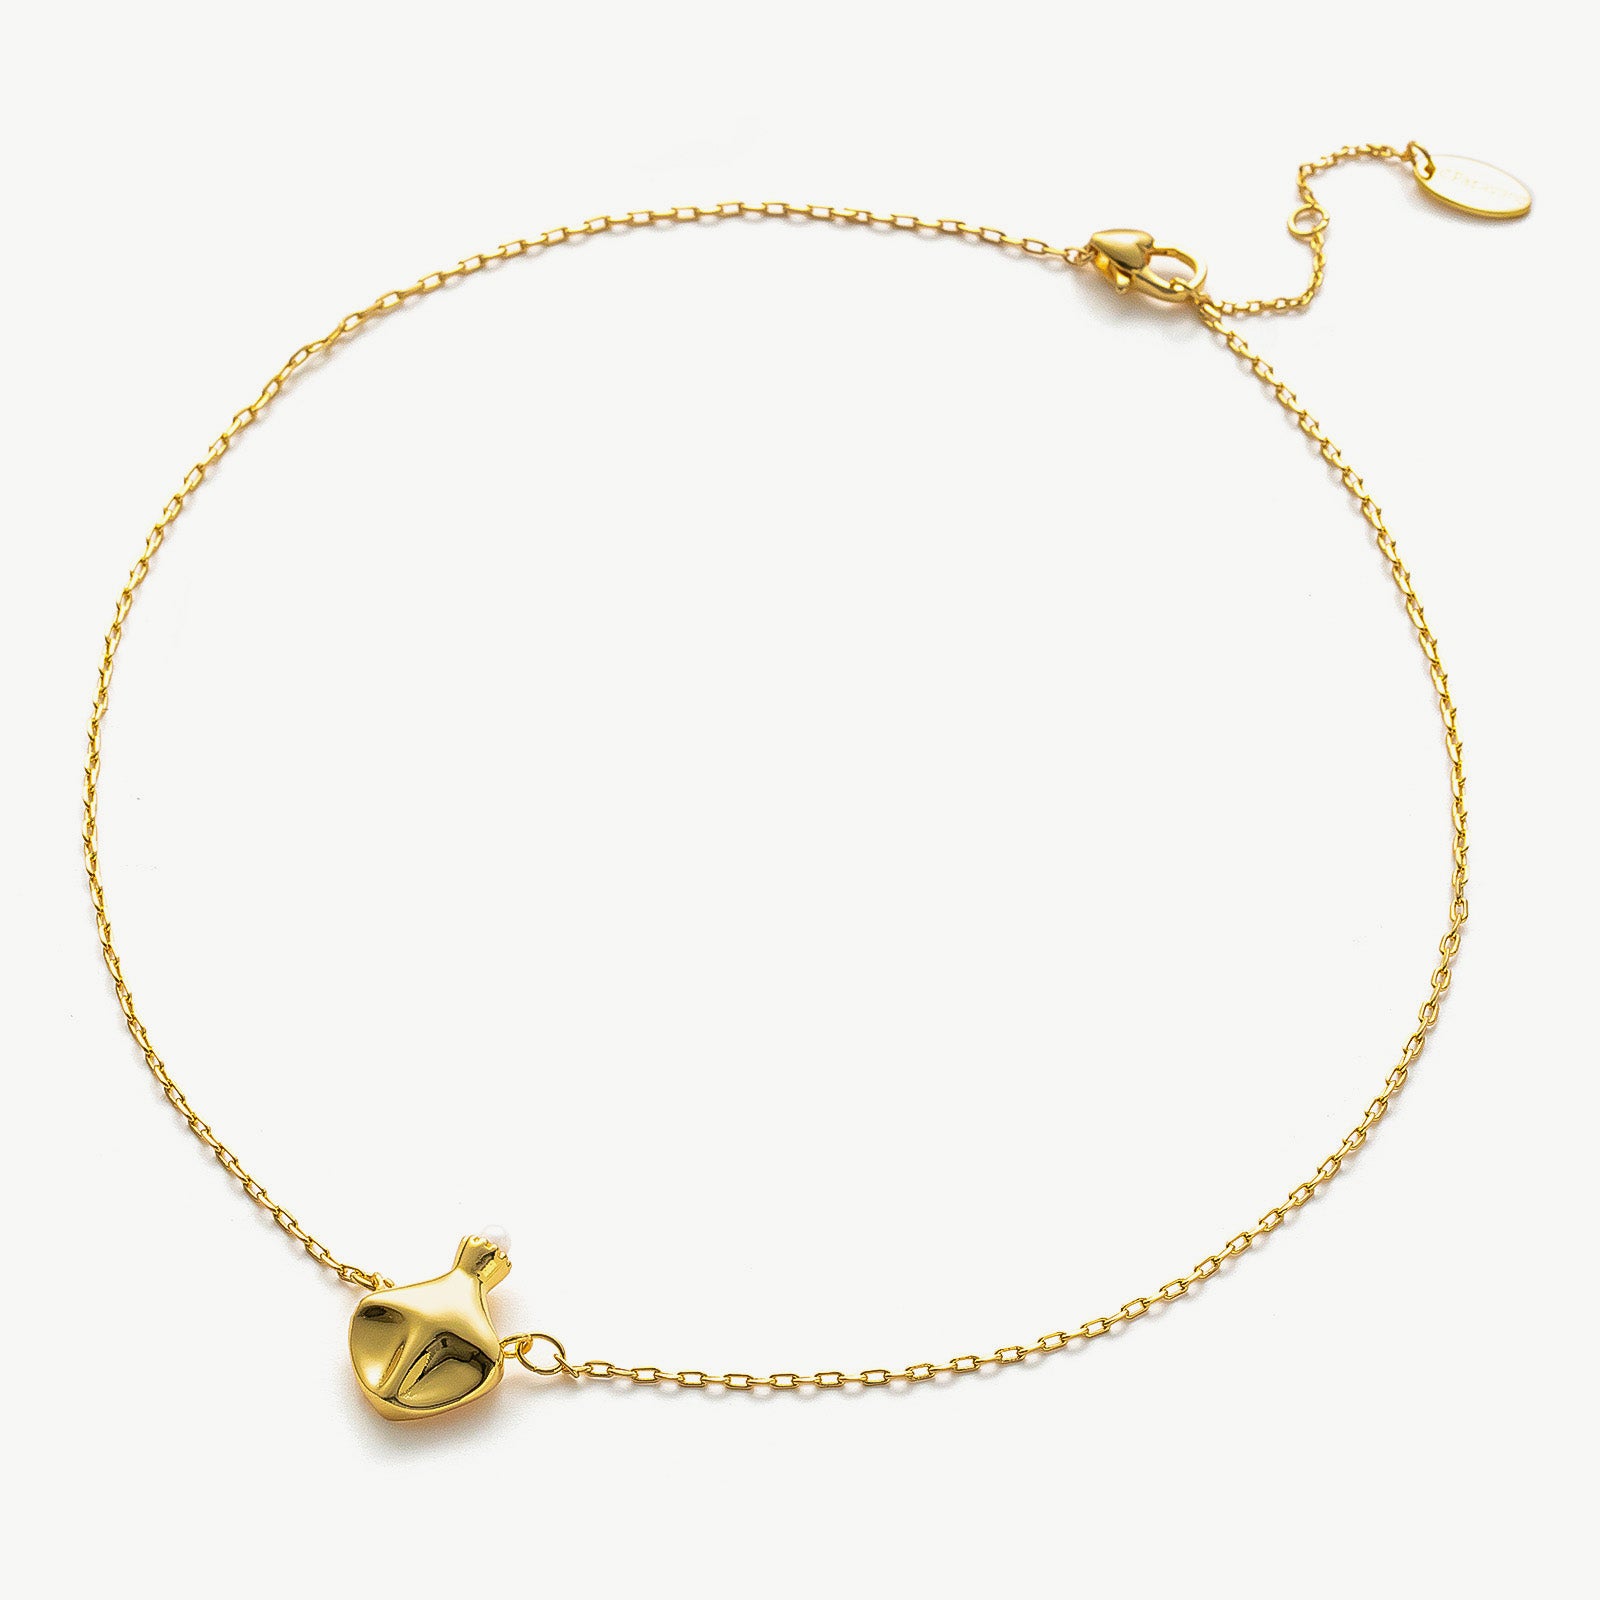 Stylish Medium Pebble Necklace, showcasing earthly beauty, this necklace features a polished medium pebble pendant on a delicate chain, creating a refined and versatile accessory for any occasion